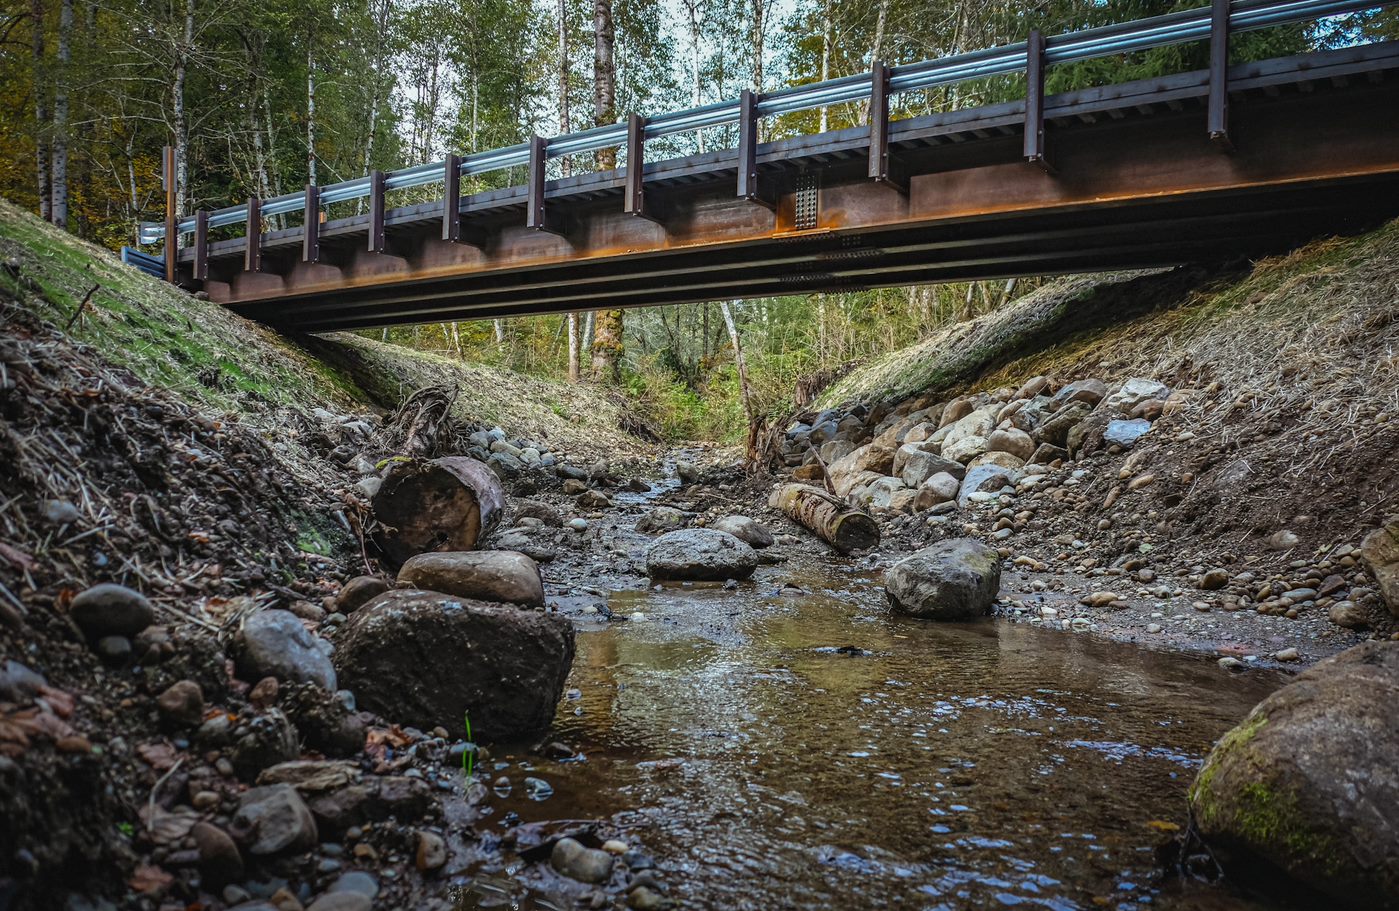 A bridge passes over a stream that salmon can swim up.